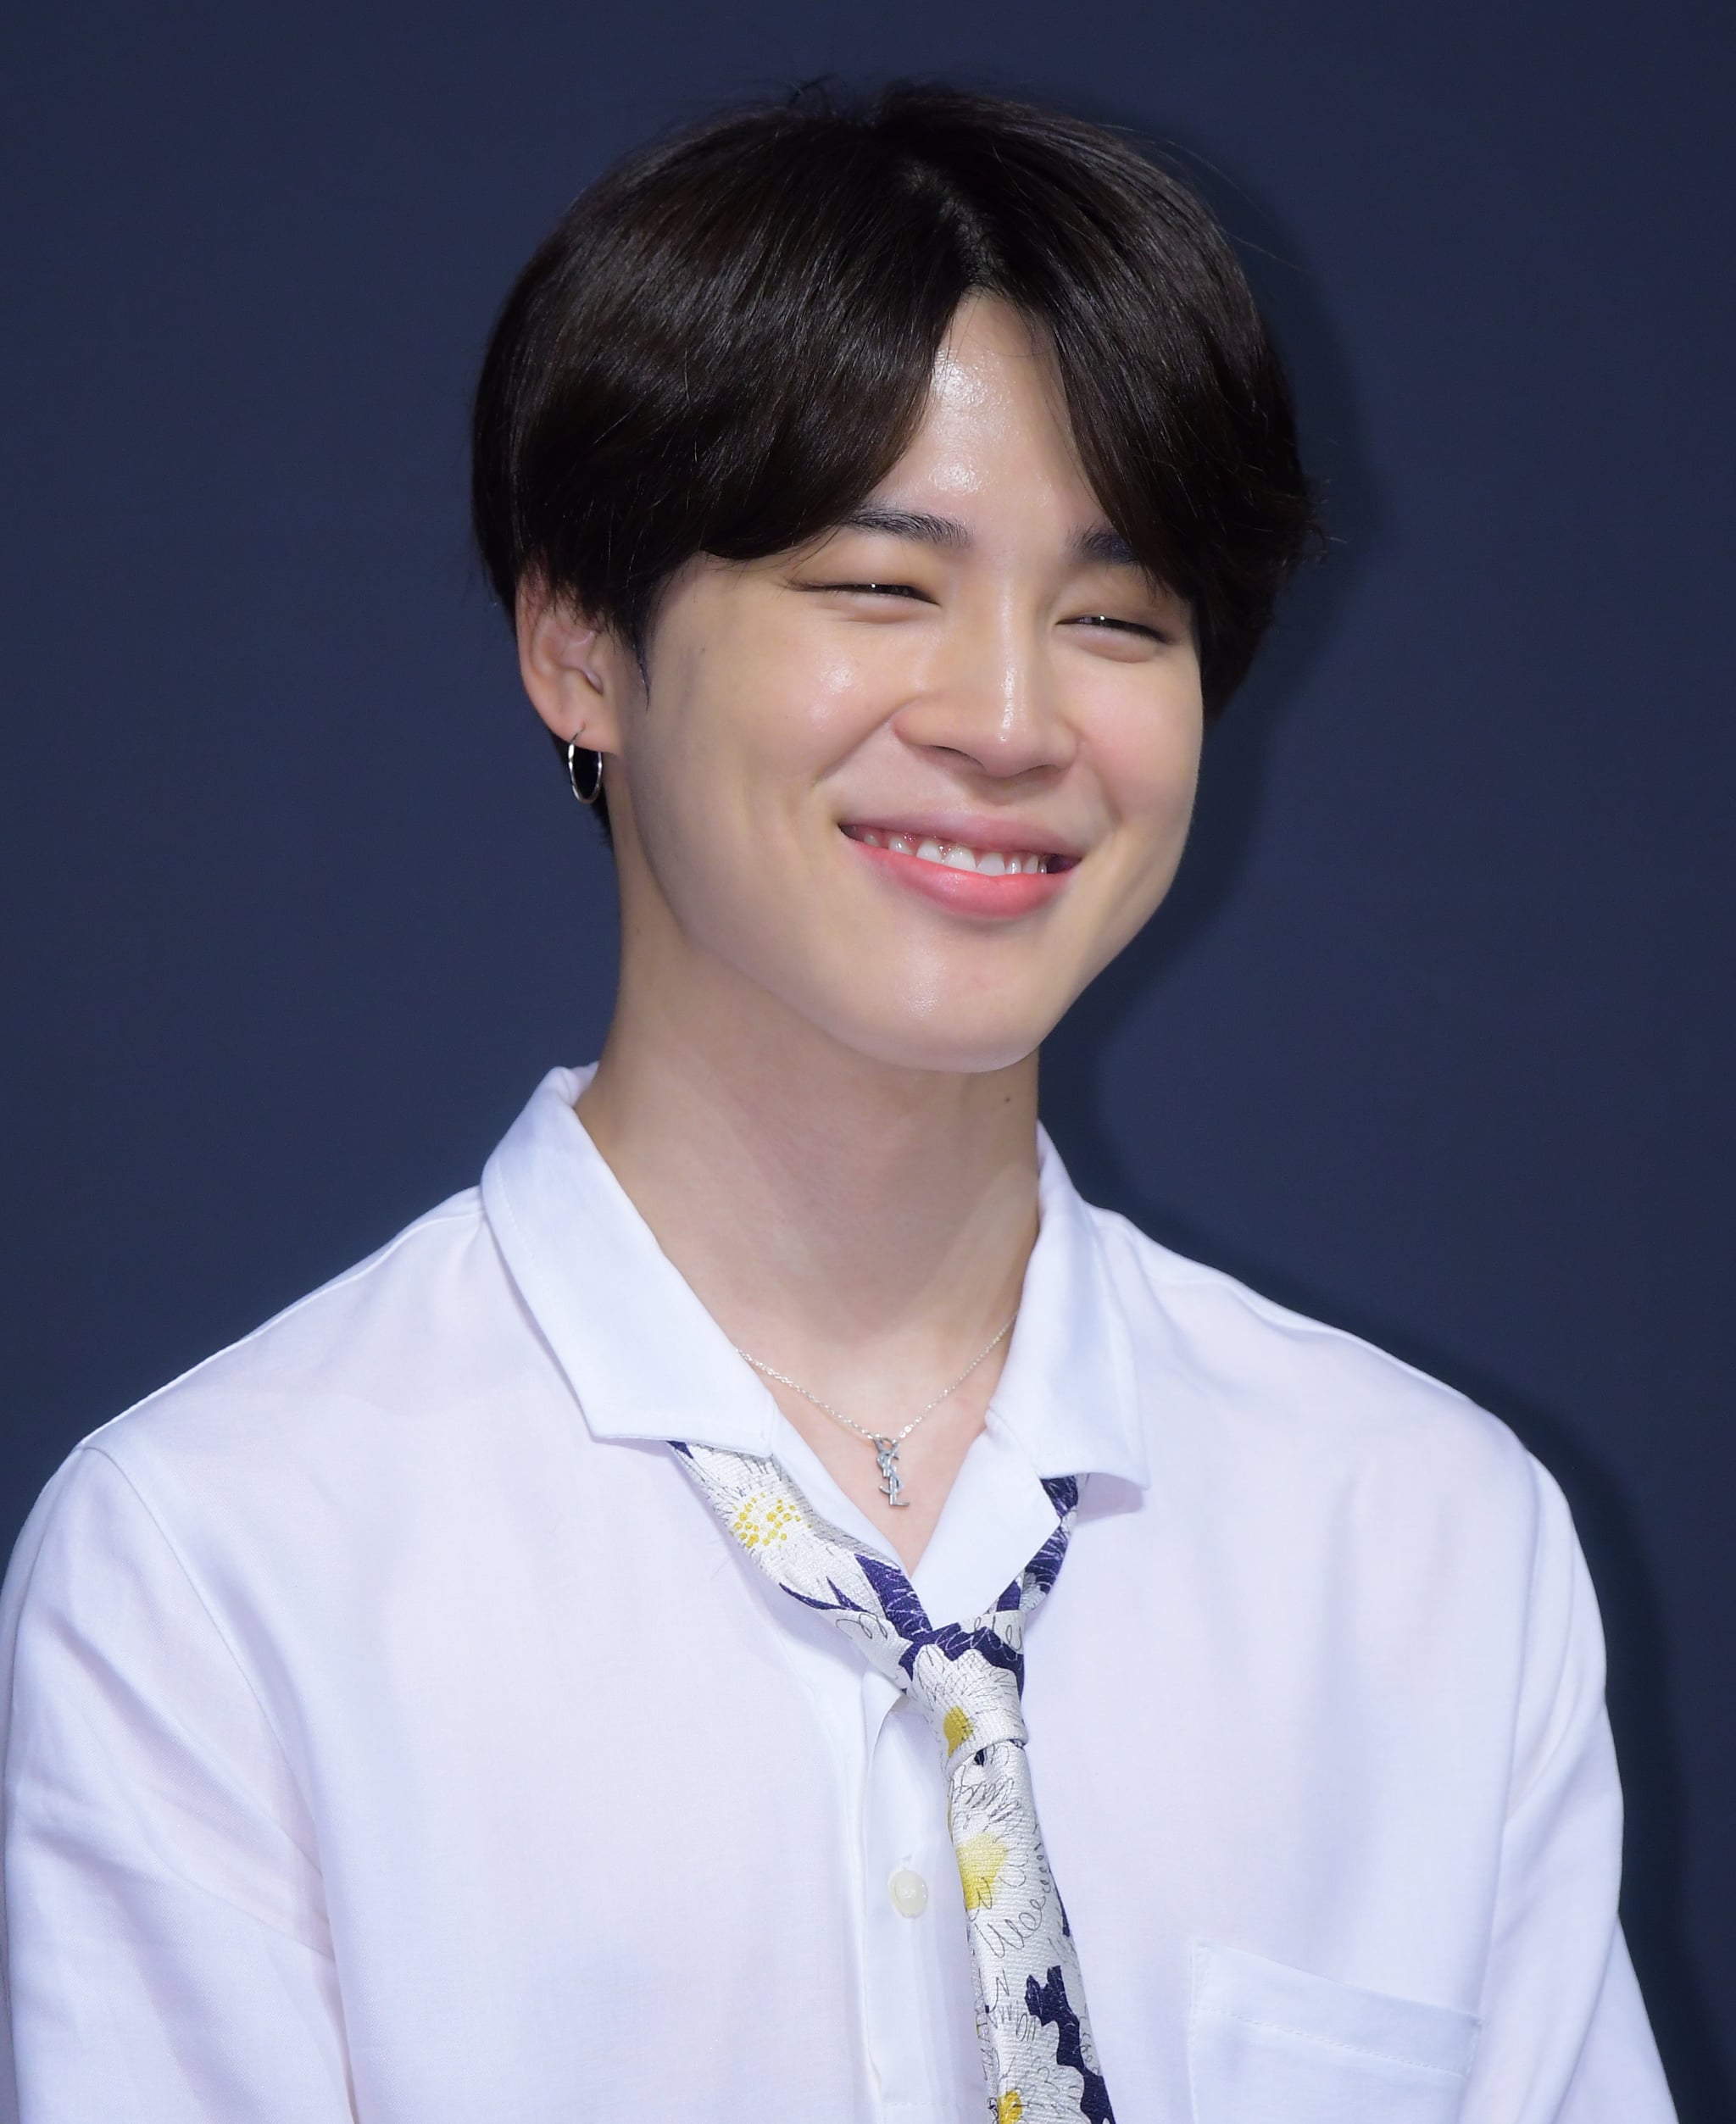 SEOUL, SOUTH KOREA - MAY 24: Jimin of BTS attends press conference for the BTS's Third Album 'LOVE YOURSELF: Tear' Release at Lotte Hotel Seoul on May 24, 2018 in Seoul, South Korea. (Photo by The Chosunilbo JNS/Imazins via Getty Images)